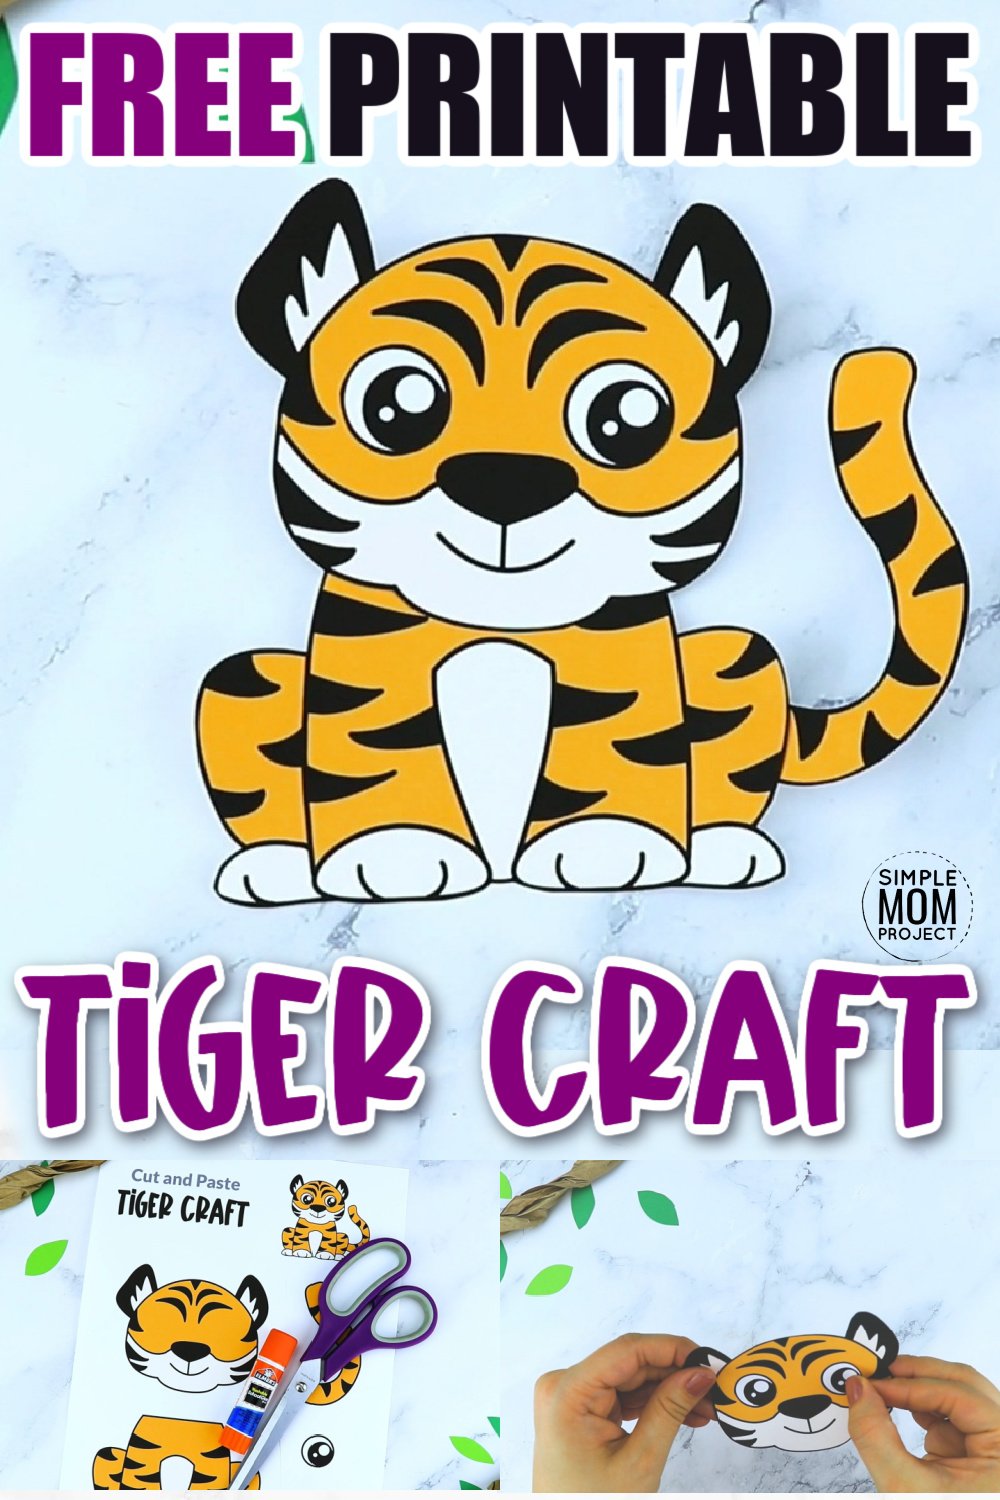 Free printable tiger craft template â simple mom project